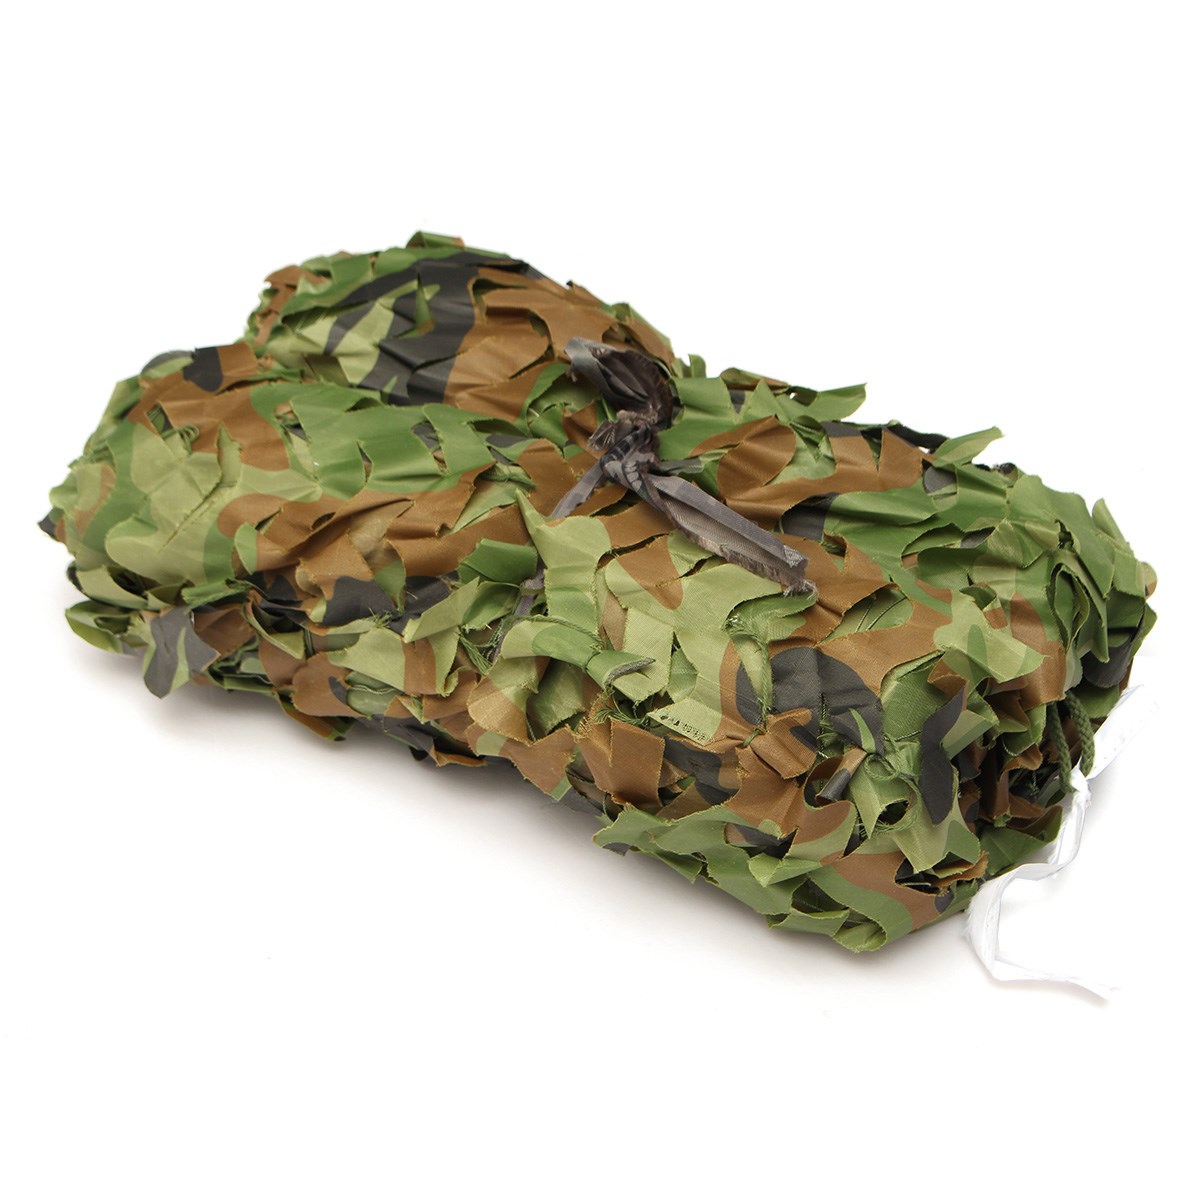 Woodland leaves Camouflage Camo Army Net Netting Camping Military Hunting Cover 